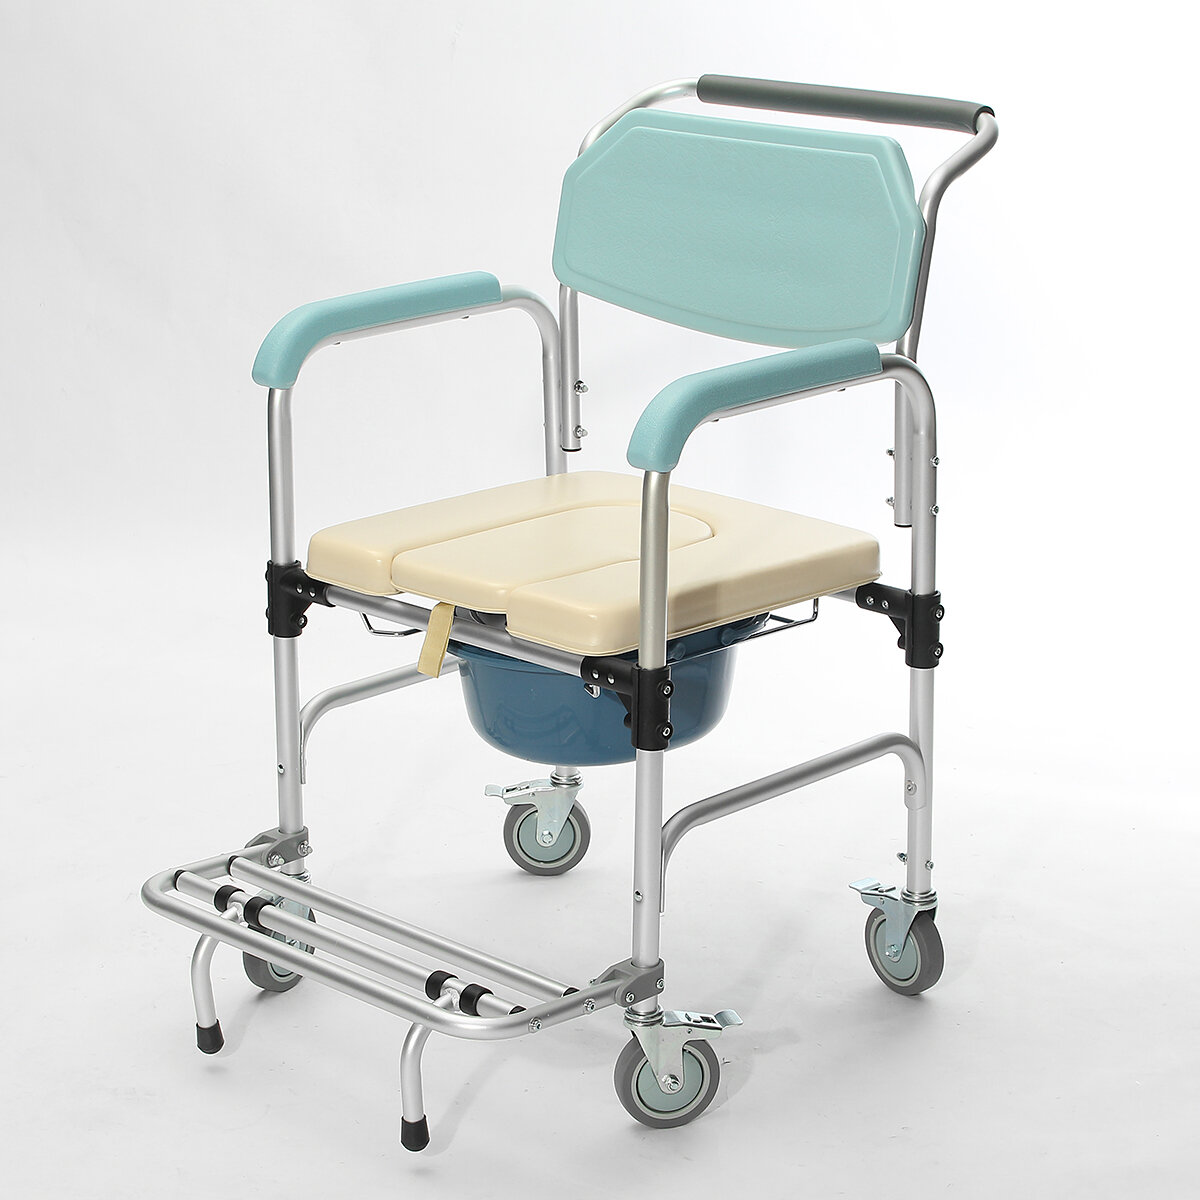 

3-in-1 Commode Wheelchair Bedside Toilet & Shower Seat Bathroom Rolling Chair Elder Folding Chair